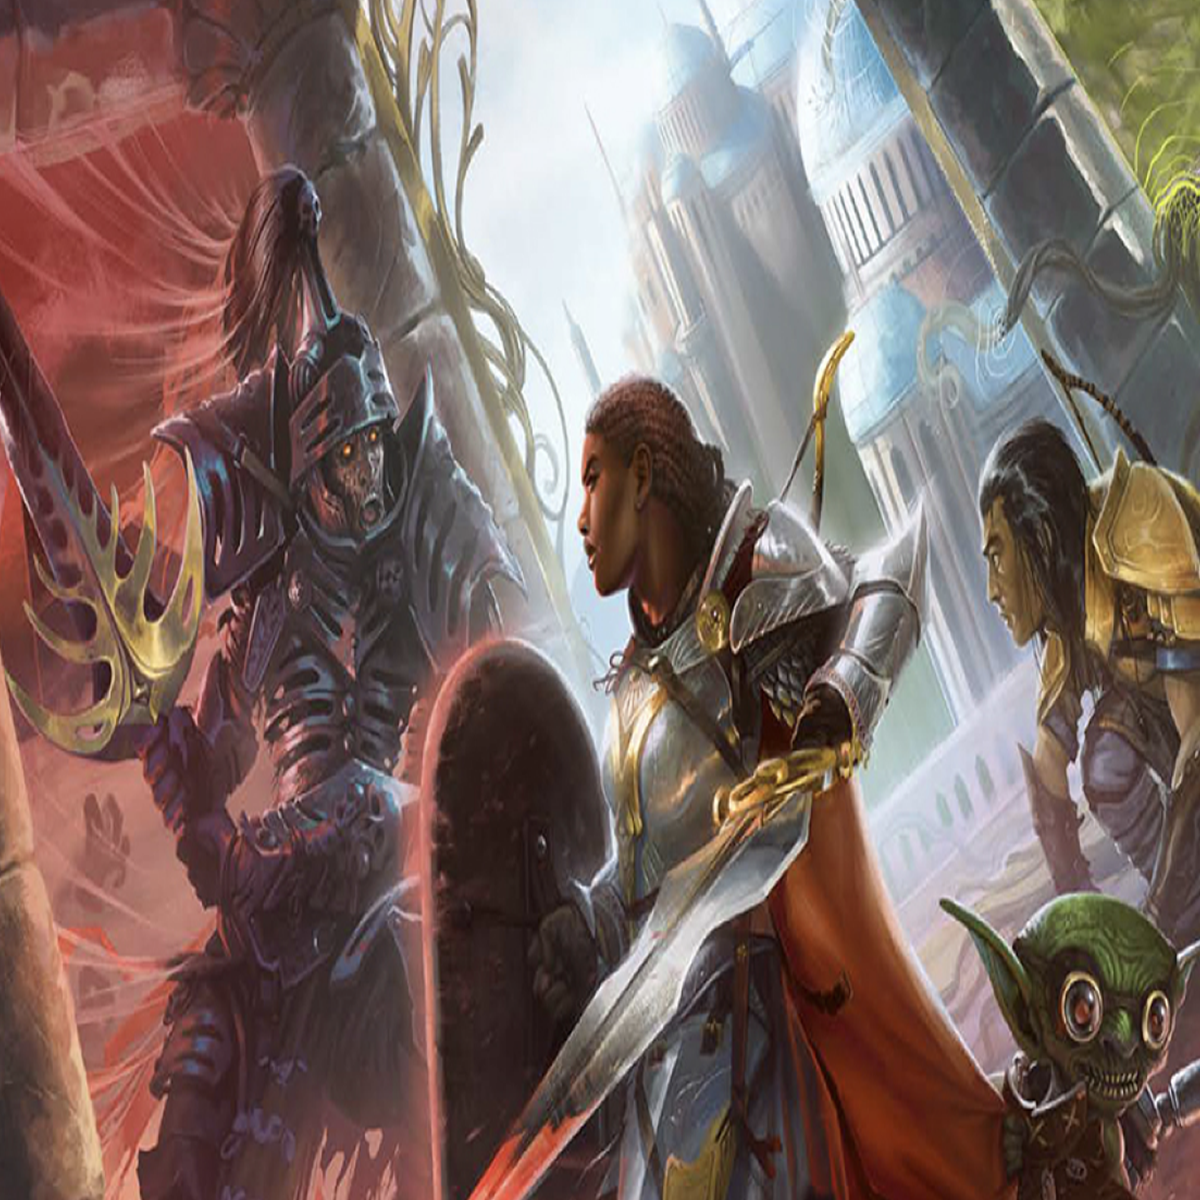 Roll20 RPG Humble Bundle features Dune, Pathfinder, Tales from the